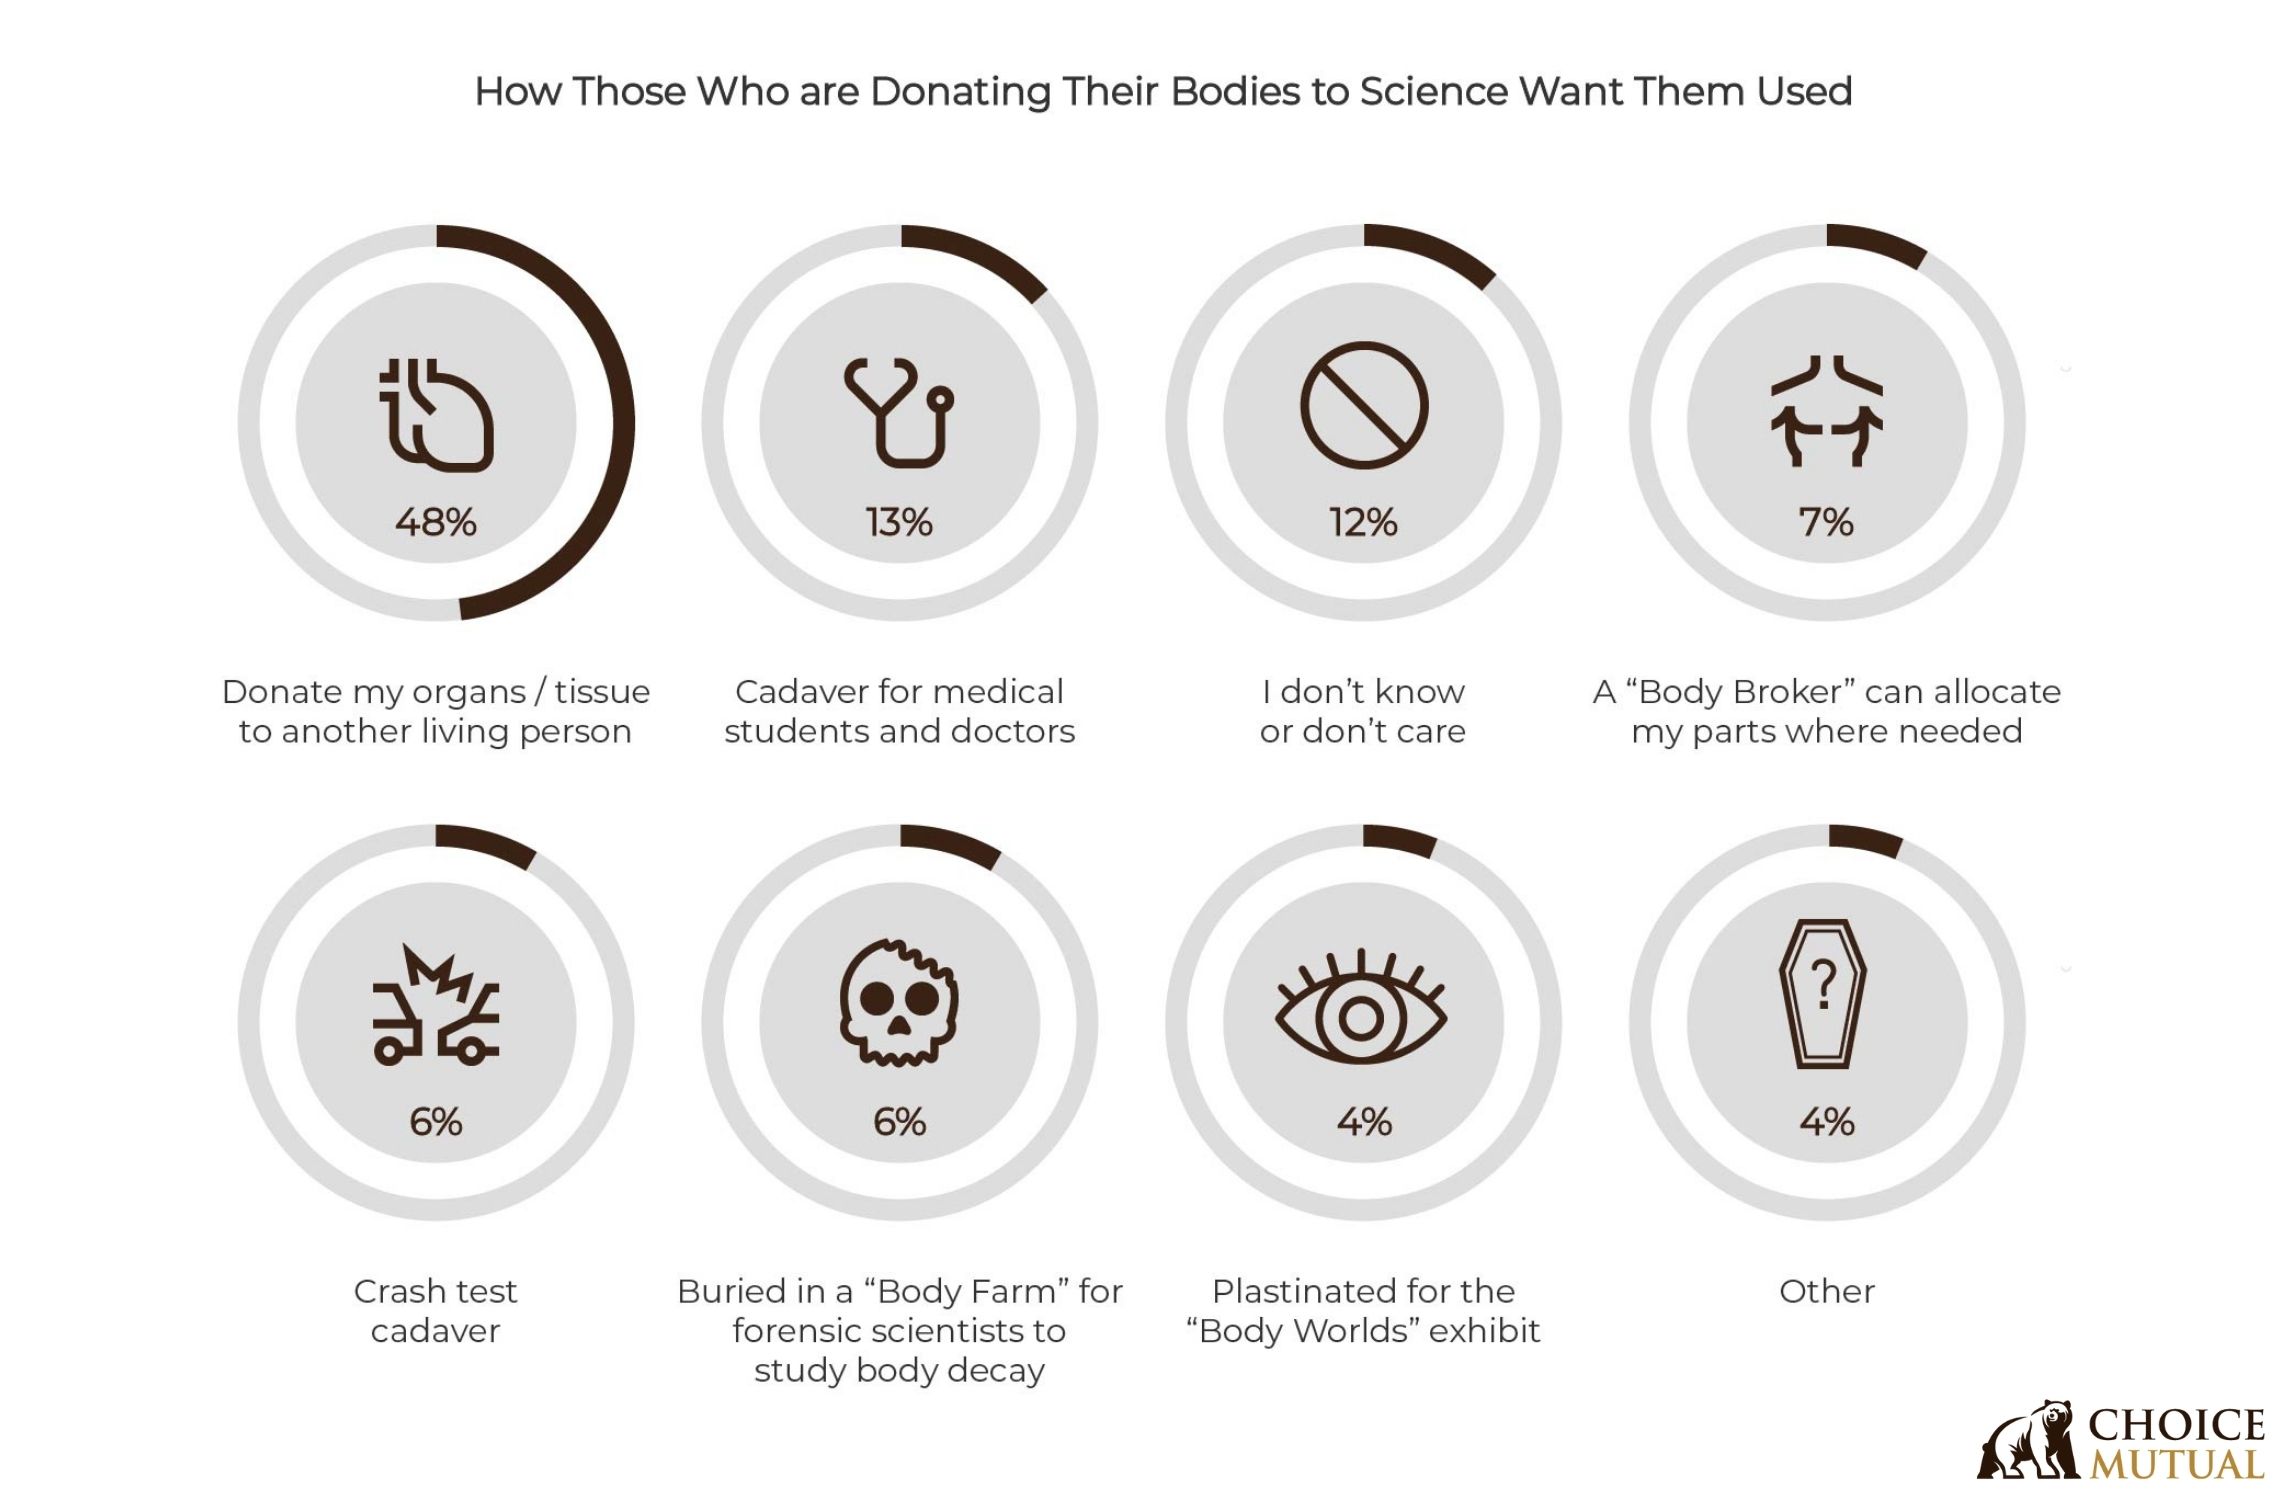 graphs showing how people want their bodies used when donating to science